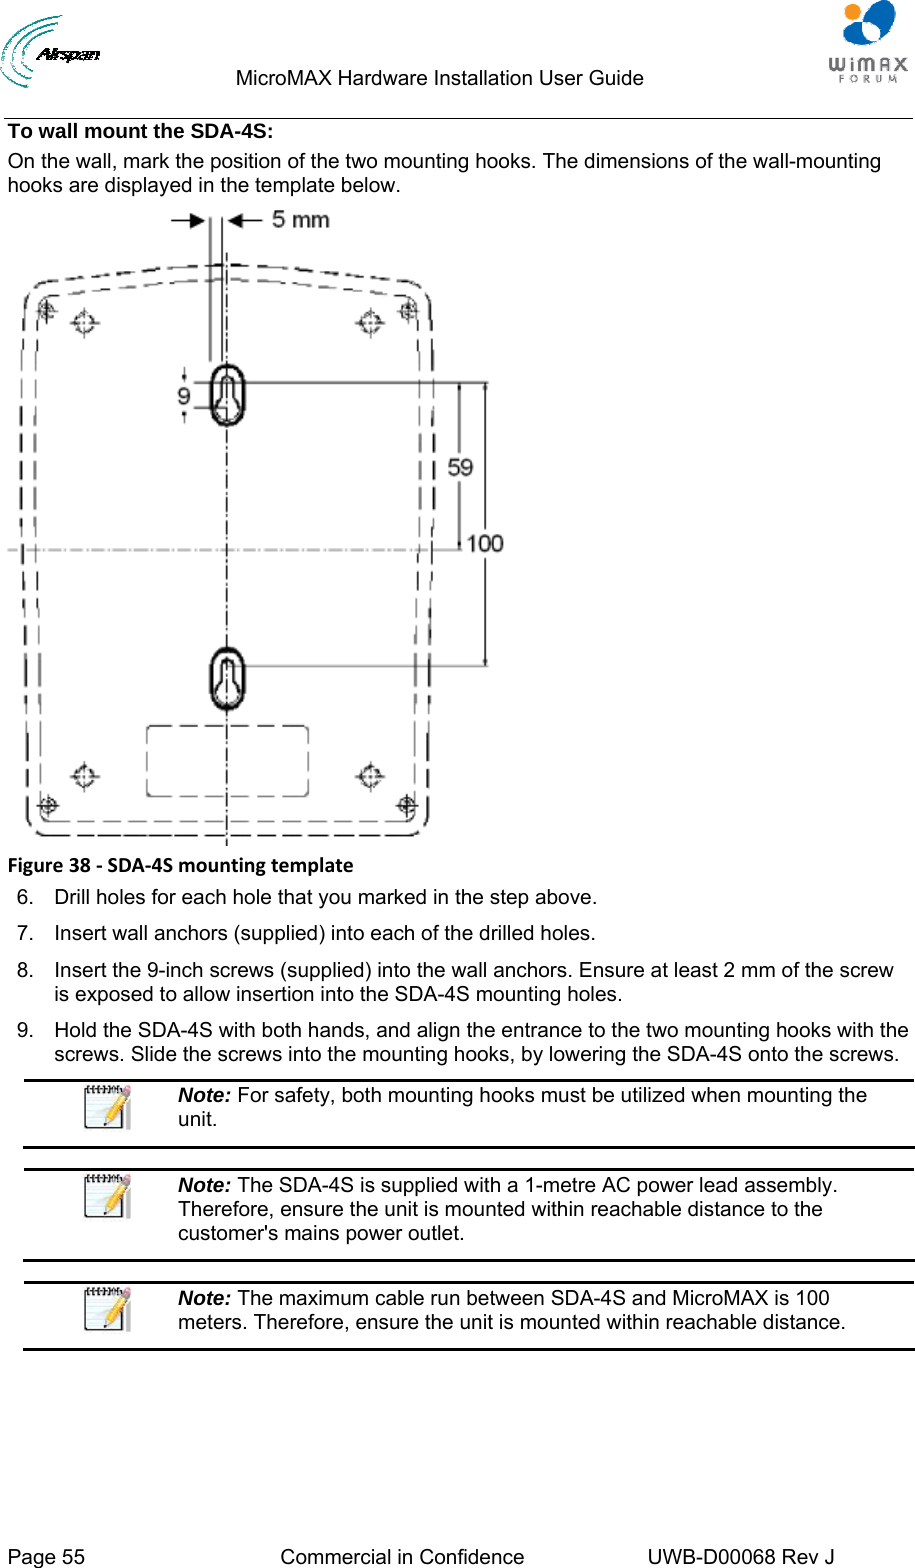                                  MicroMAX Hardware Installation User Guide  Page 55  Commercial in Confidence  UWB-D00068 Rev J   To wall mount the SDA-4S: On the wall, mark the position of the two mounting hooks. The dimensions of the wall-mounting hooks are displayed in the template below.  Figure38‐SDA‐4Smountingtemplate6.  Drill holes for each hole that you marked in the step above. 7.  Insert wall anchors (supplied) into each of the drilled holes. 8.  Insert the 9-inch screws (supplied) into the wall anchors. Ensure at least 2 mm of the screw is exposed to allow insertion into the SDA-4S mounting holes. 9.  Hold the SDA-4S with both hands, and align the entrance to the two mounting hooks with the screws. Slide the screws into the mounting hooks, by lowering the SDA-4S onto the screws.  Note: For safety, both mounting hooks must be utilized when mounting the unit.   Note: The SDA-4S is supplied with a 1-metre AC power lead assembly. Therefore, ensure the unit is mounted within reachable distance to the customer&apos;s mains power outlet.   Note: The maximum cable run between SDA-4S and MicroMAX is 100 meters. Therefore, ensure the unit is mounted within reachable distance.  